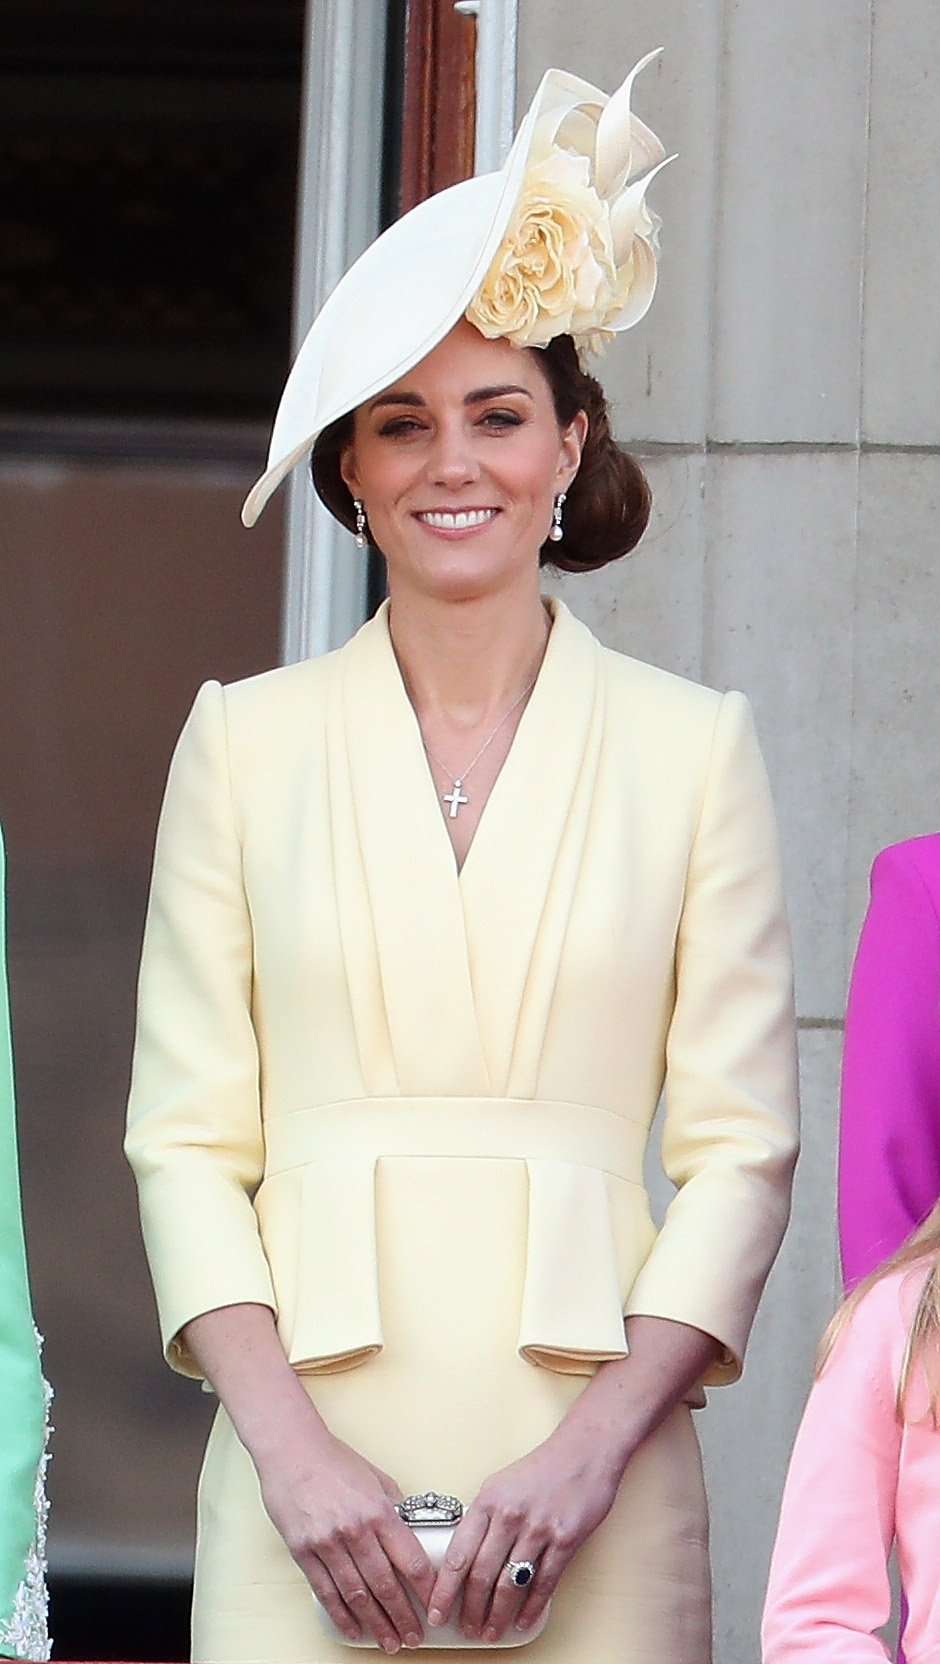 The Duchess of Cambridge, Kate Middleton, attends Trooping the Color in June 2019 | Photo: Getty Images